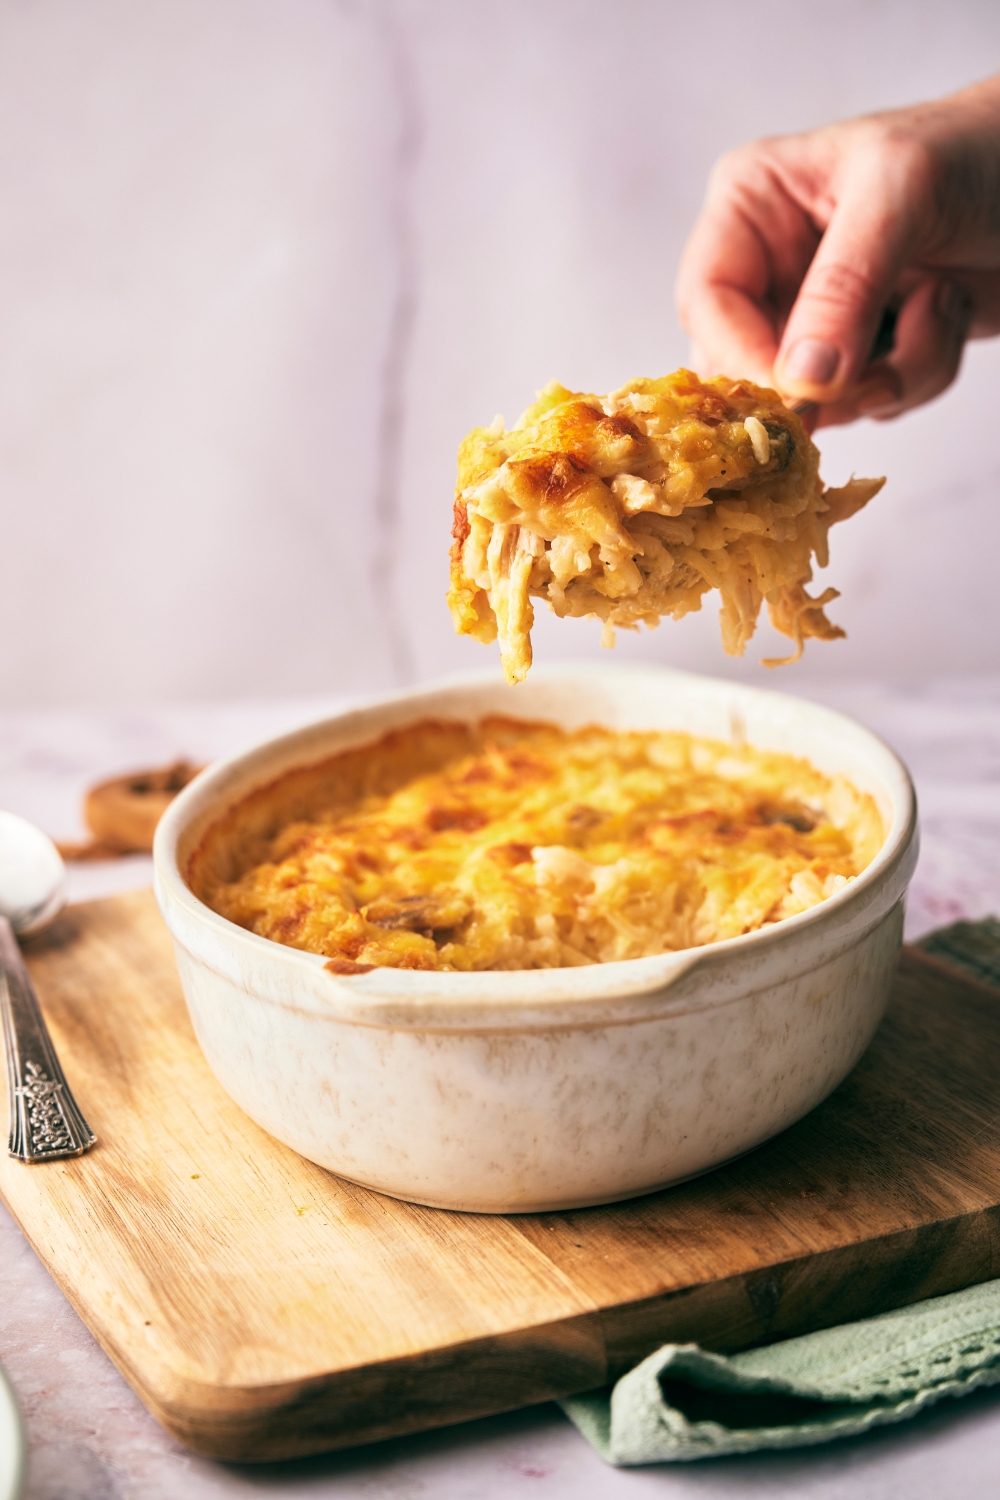 A spoon holding a large scoop of cheesy chicken and rice casserole over the baking dish as to serve it.